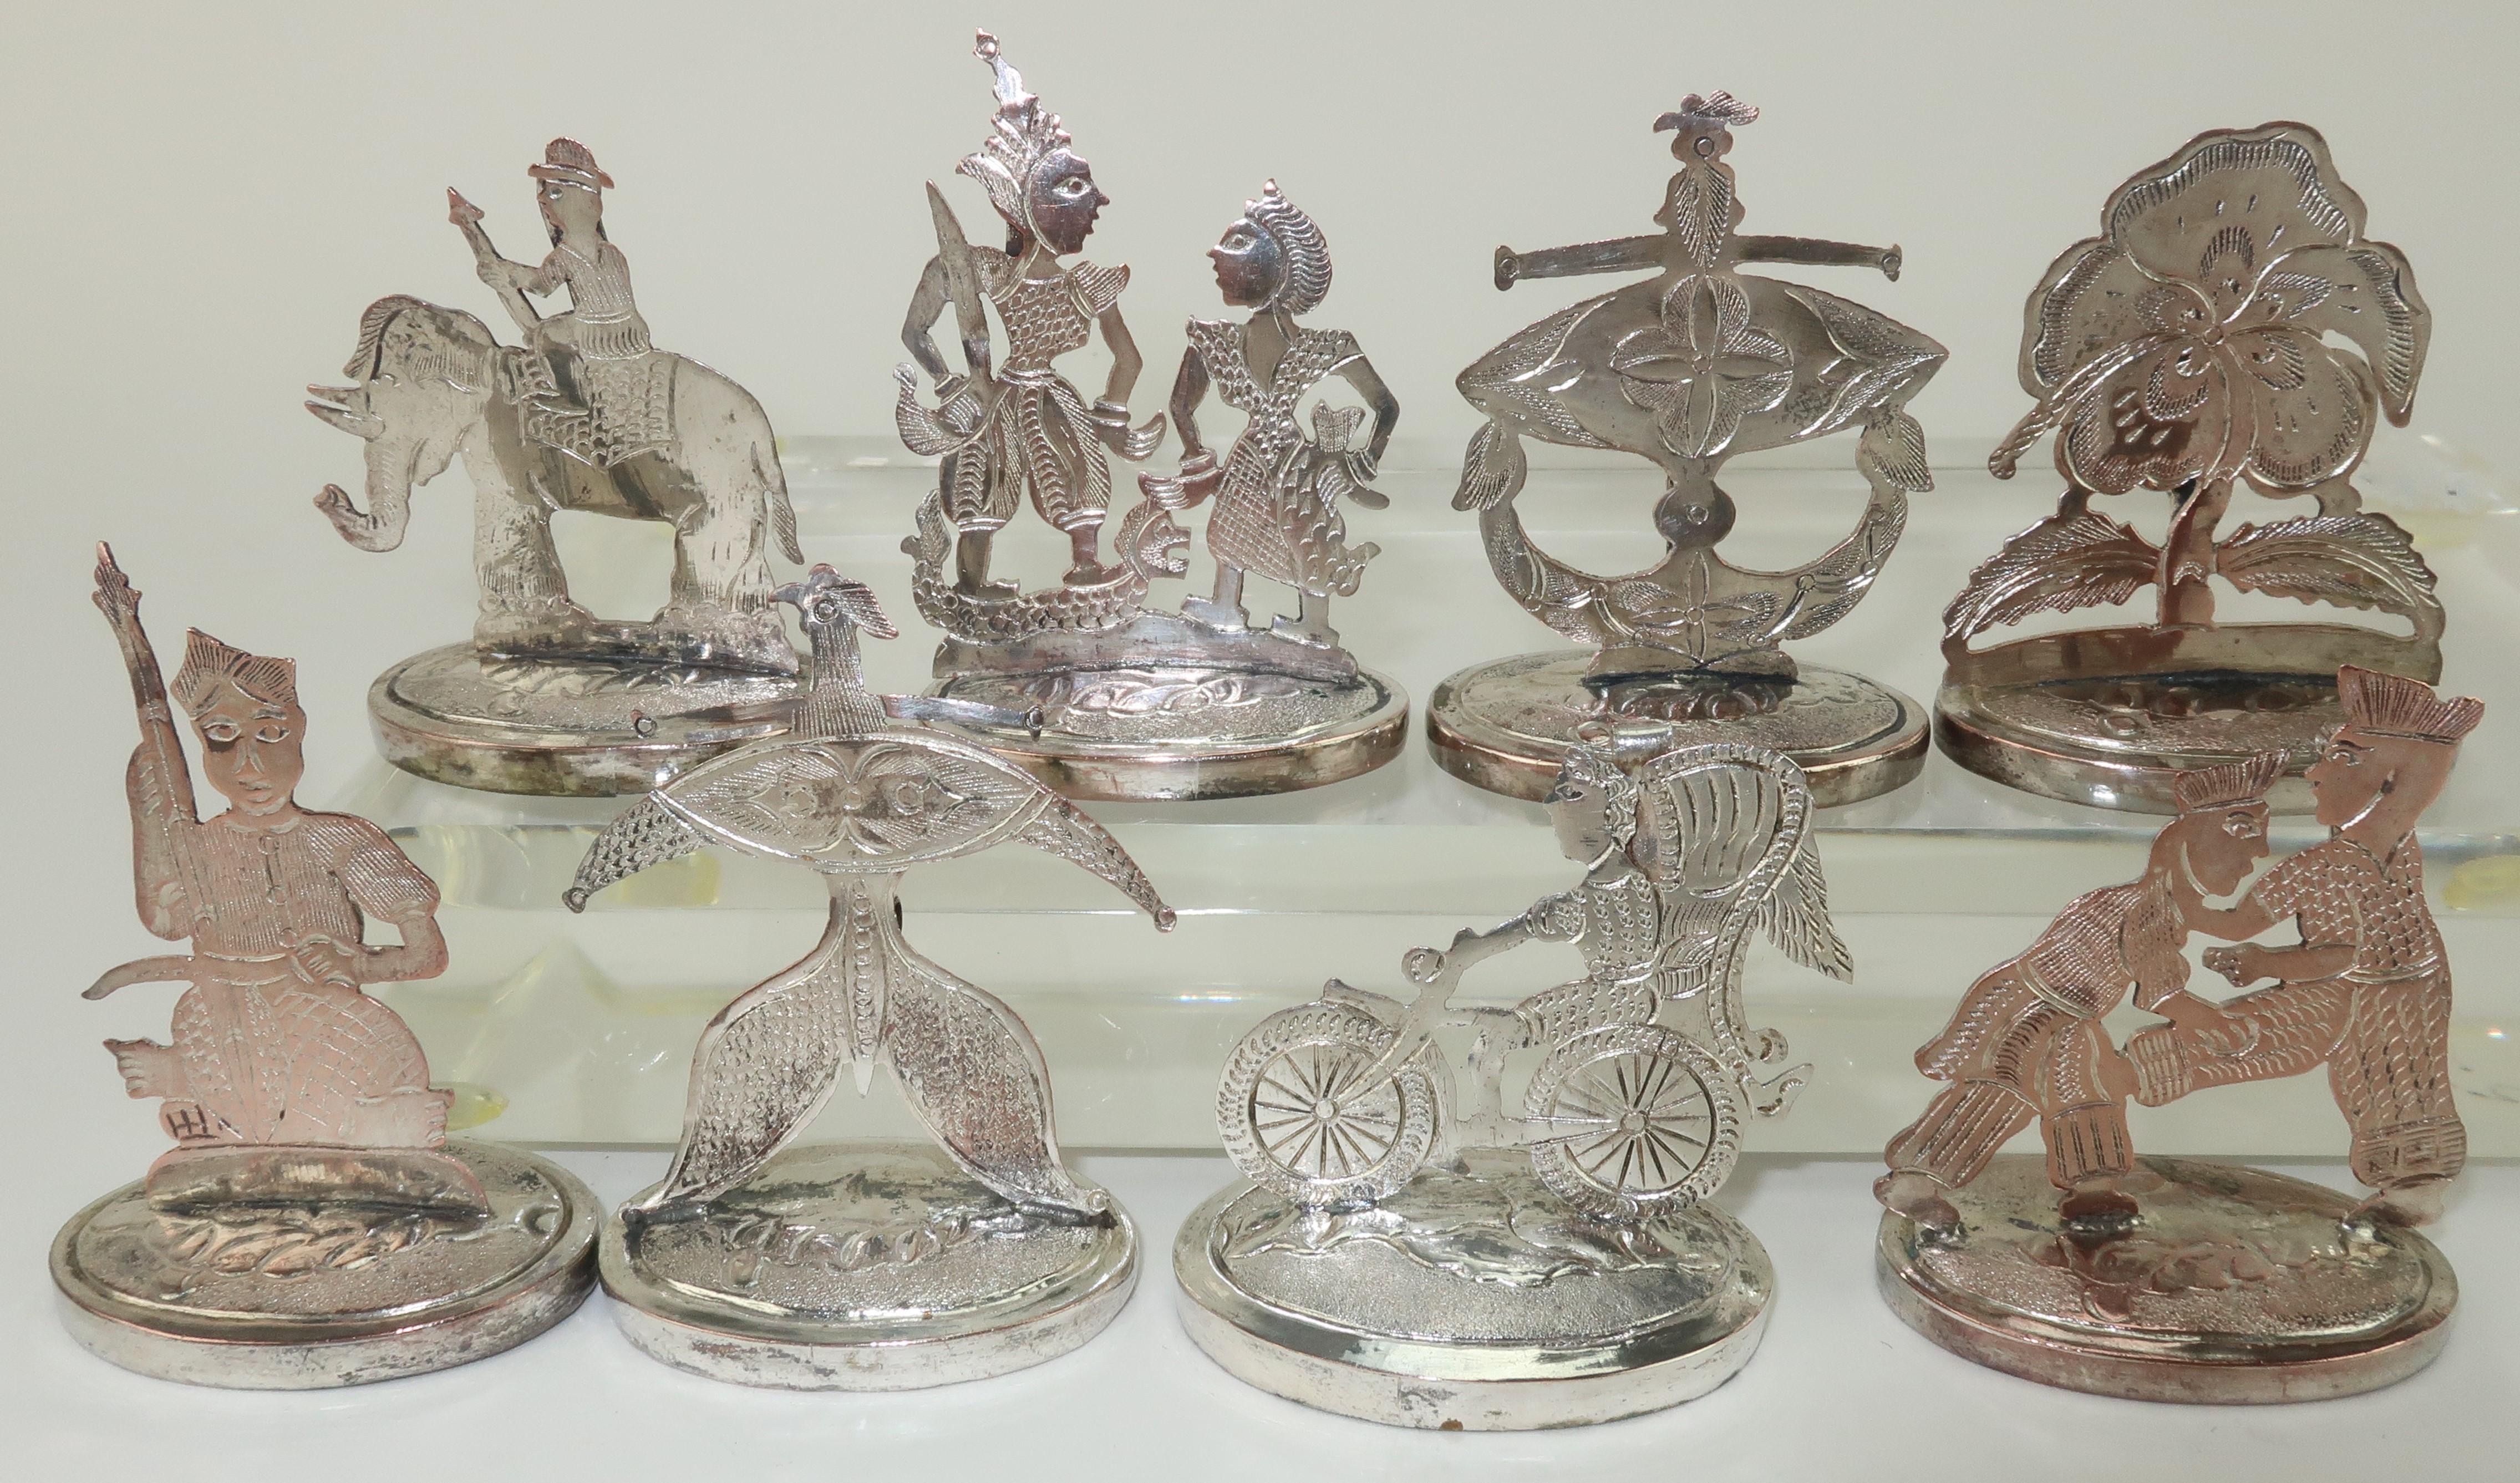 Set of 8 Thai silver figurative place card holders. The holders are hallmarked at the back but appear to be plate. They are beautifully detailed and offer exotic silhouettes with traditional Thai themes. Each holder is outfitted at the back with a